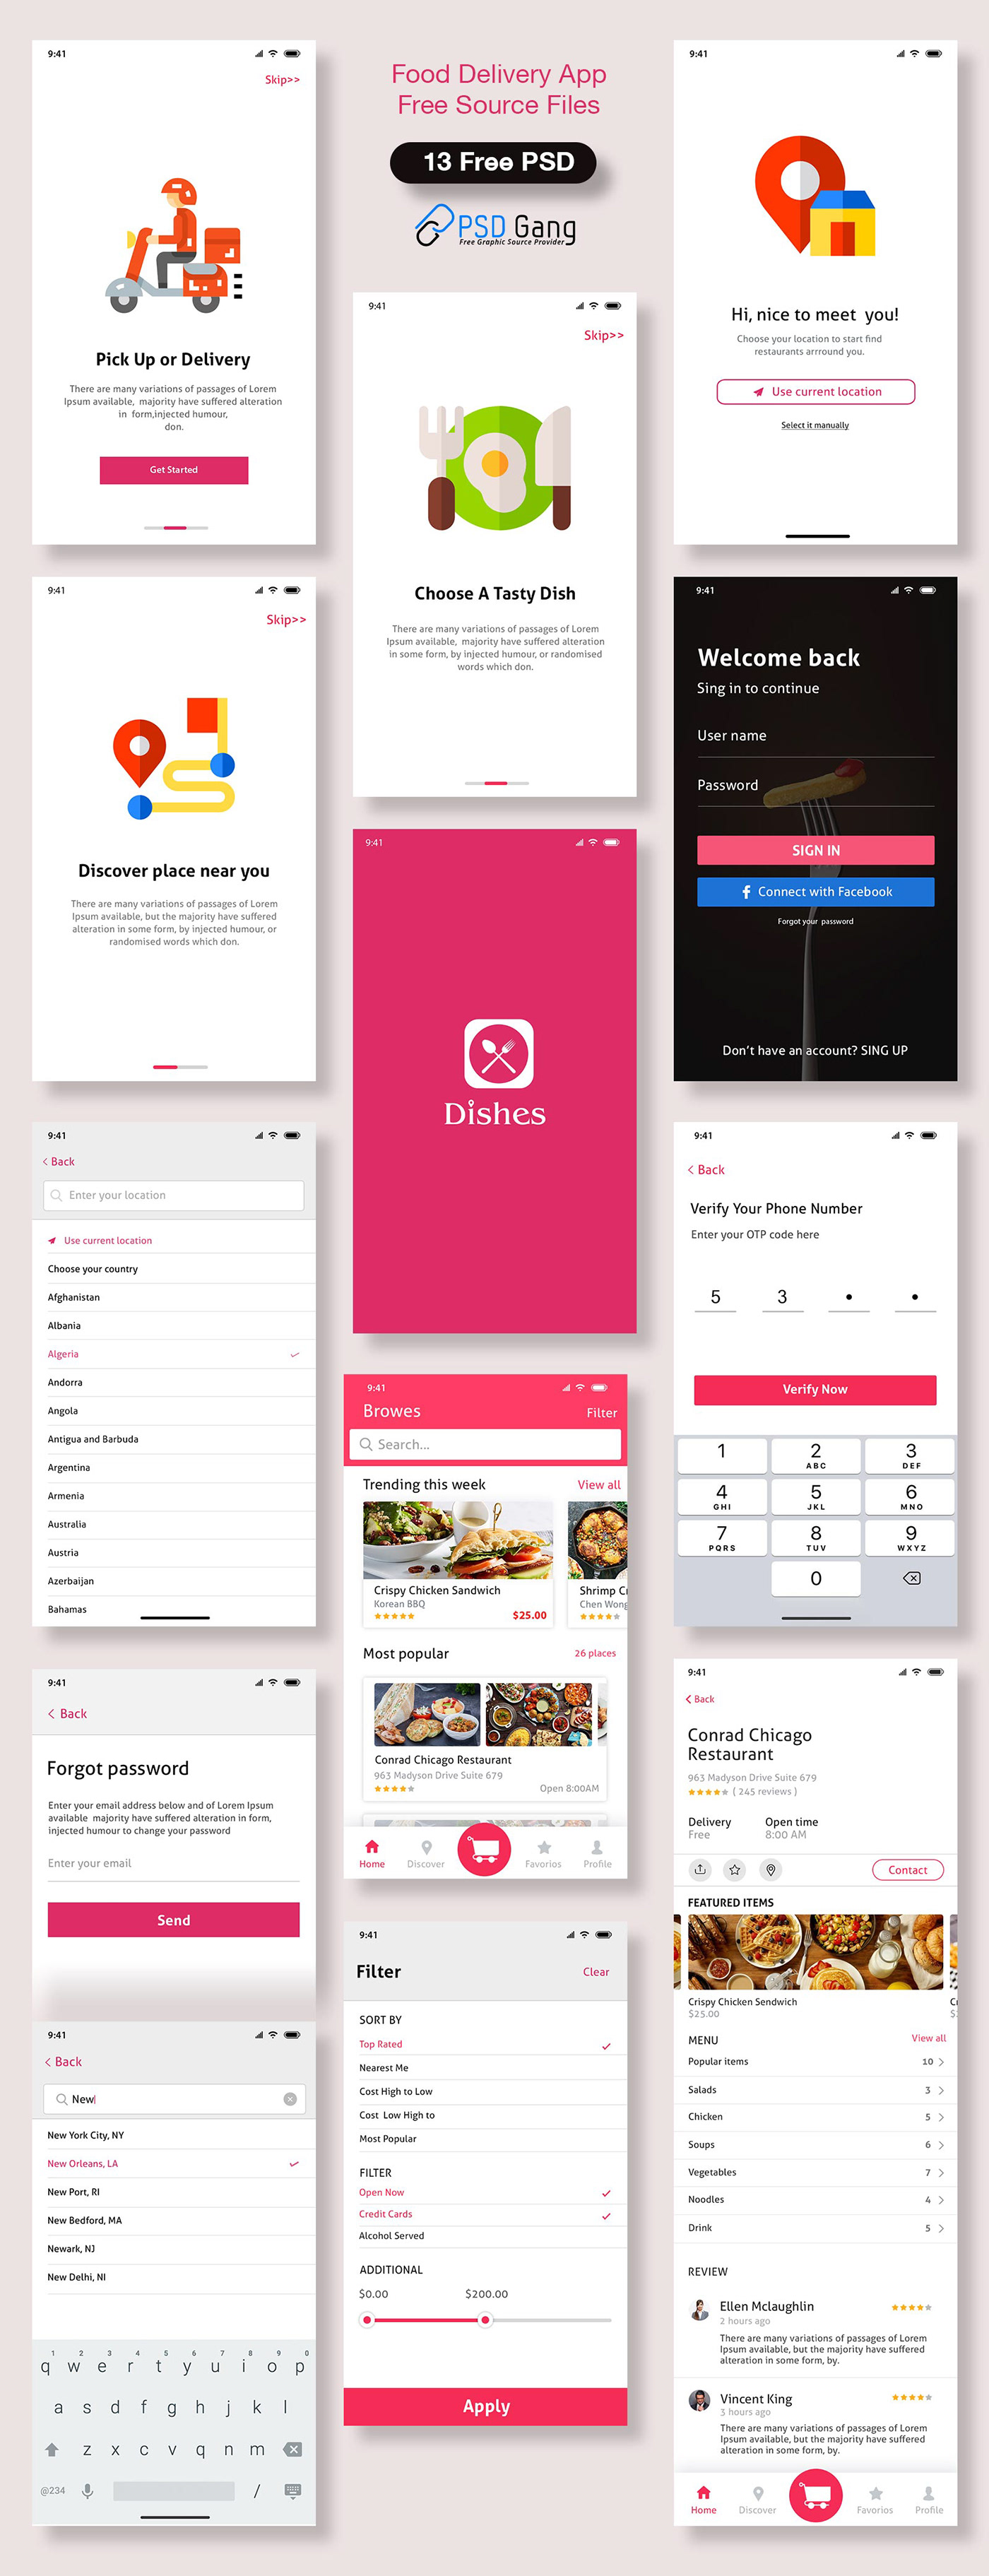 Food delivery near me Mobile UI PSD on Behance